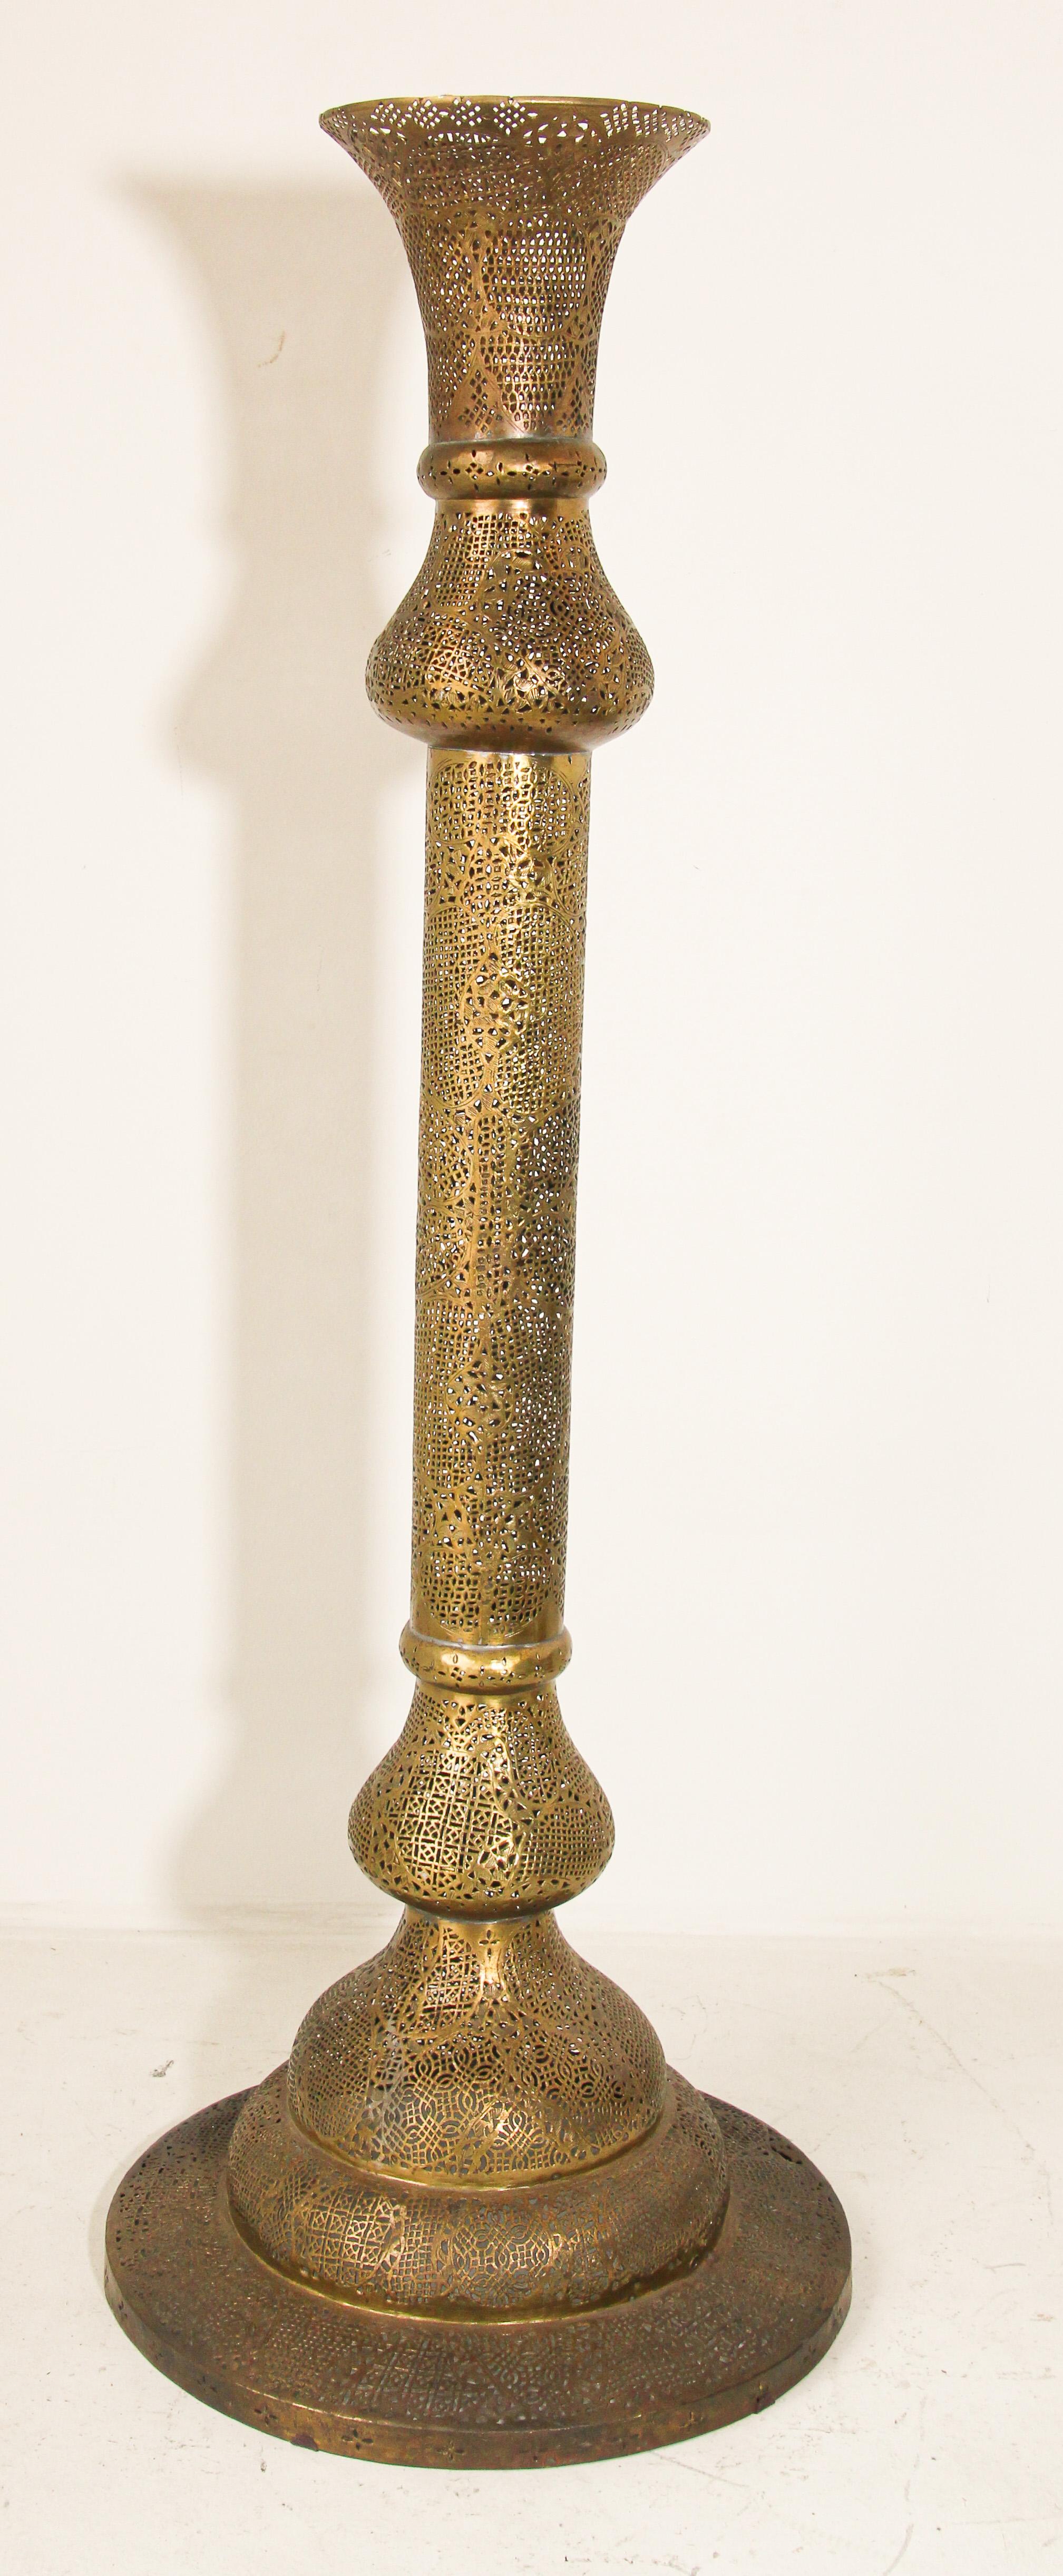 Extremely fine antique 19th century Moorish Egyptian Islamic floor candlestick in brass with Kufic Moorish revival pierced foliate openworks chased and chiseled with Persian calligraphy.
Antique 19th century or earlier Middle Eastern Egyptian Arabic